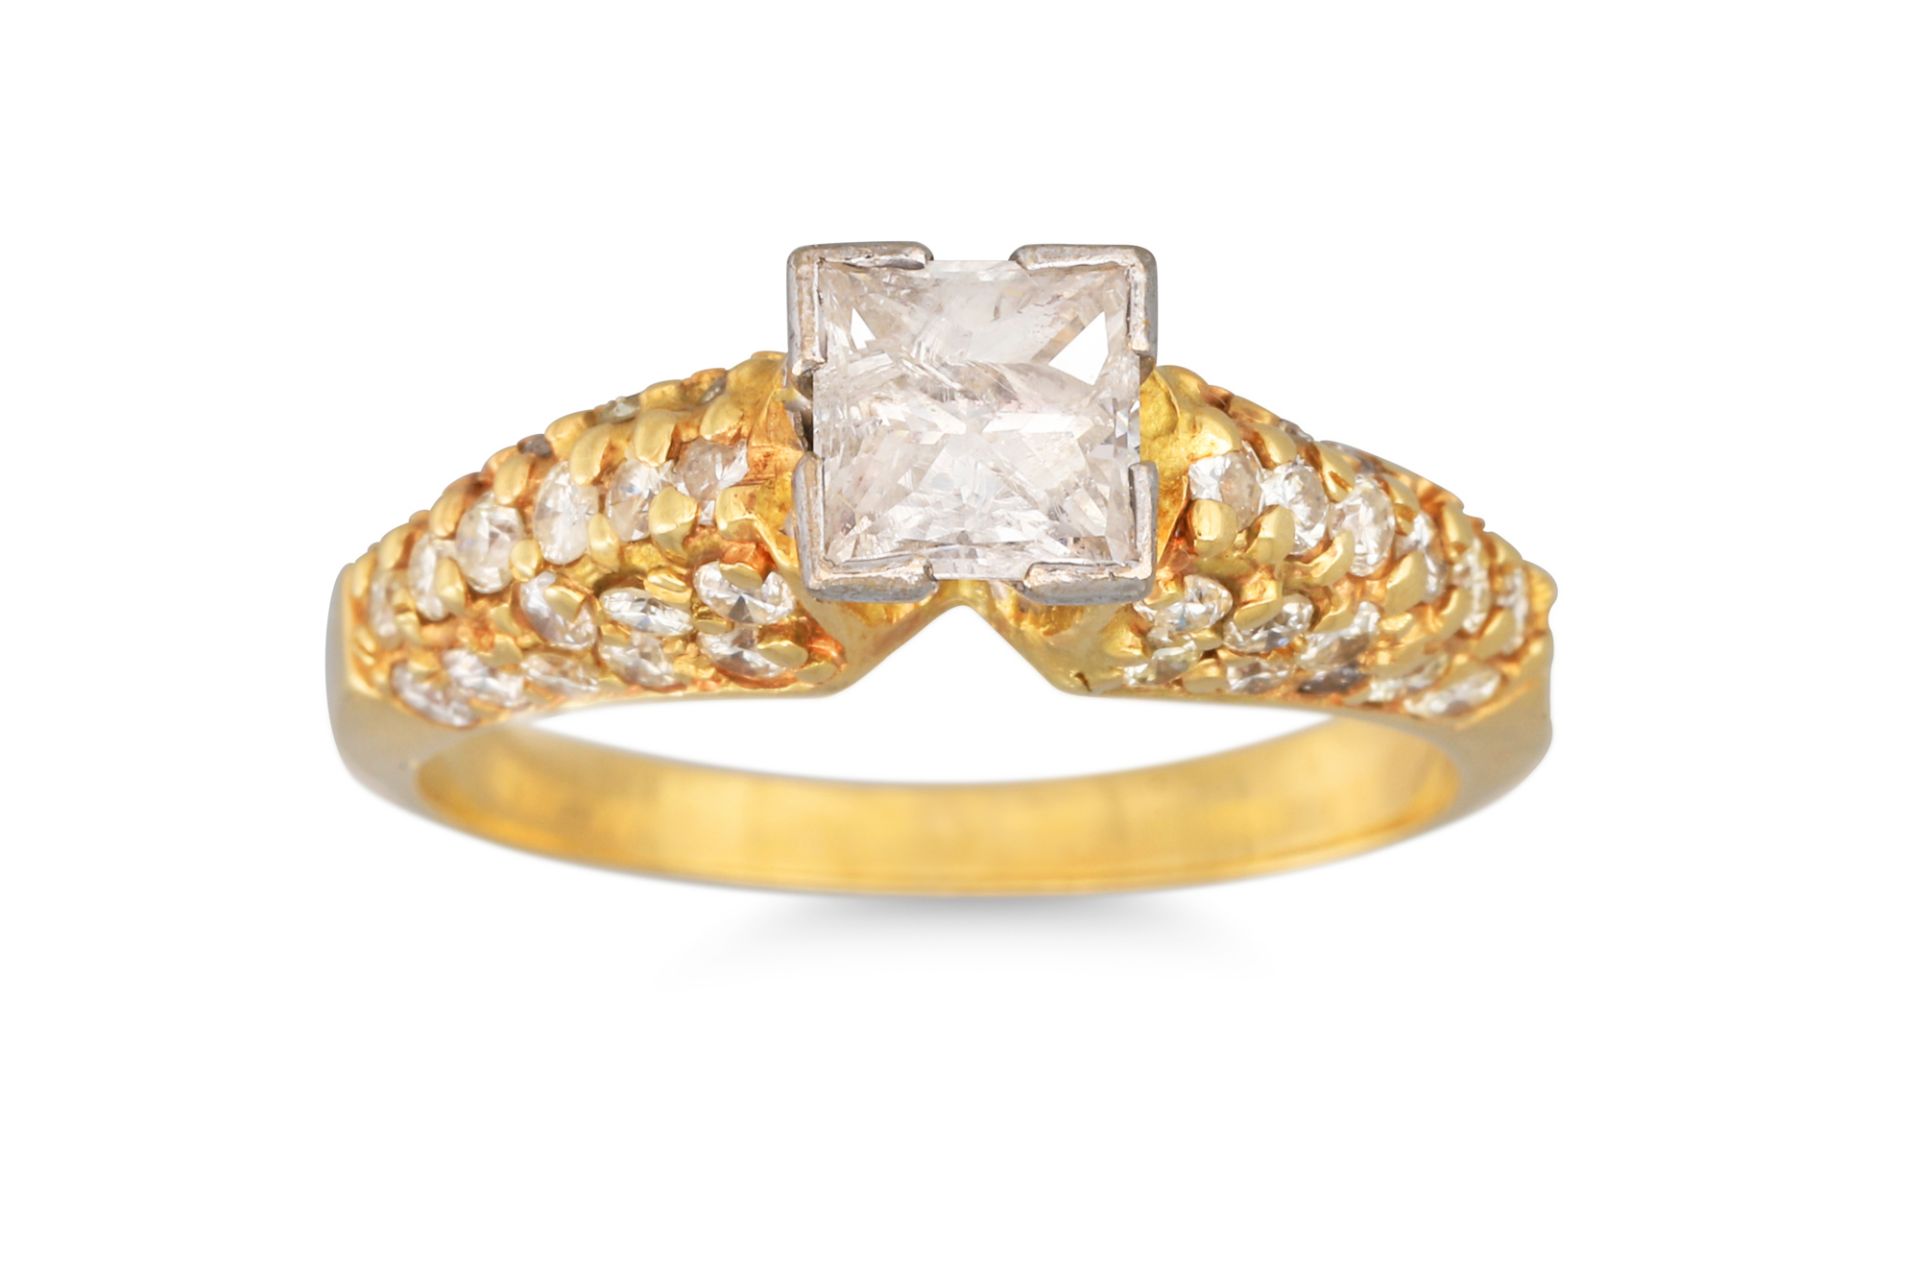 A DIAMOND PRINCESS CUT DRESS RING, with diamond shoulders, mounted in yellow gold. Estimated: weight